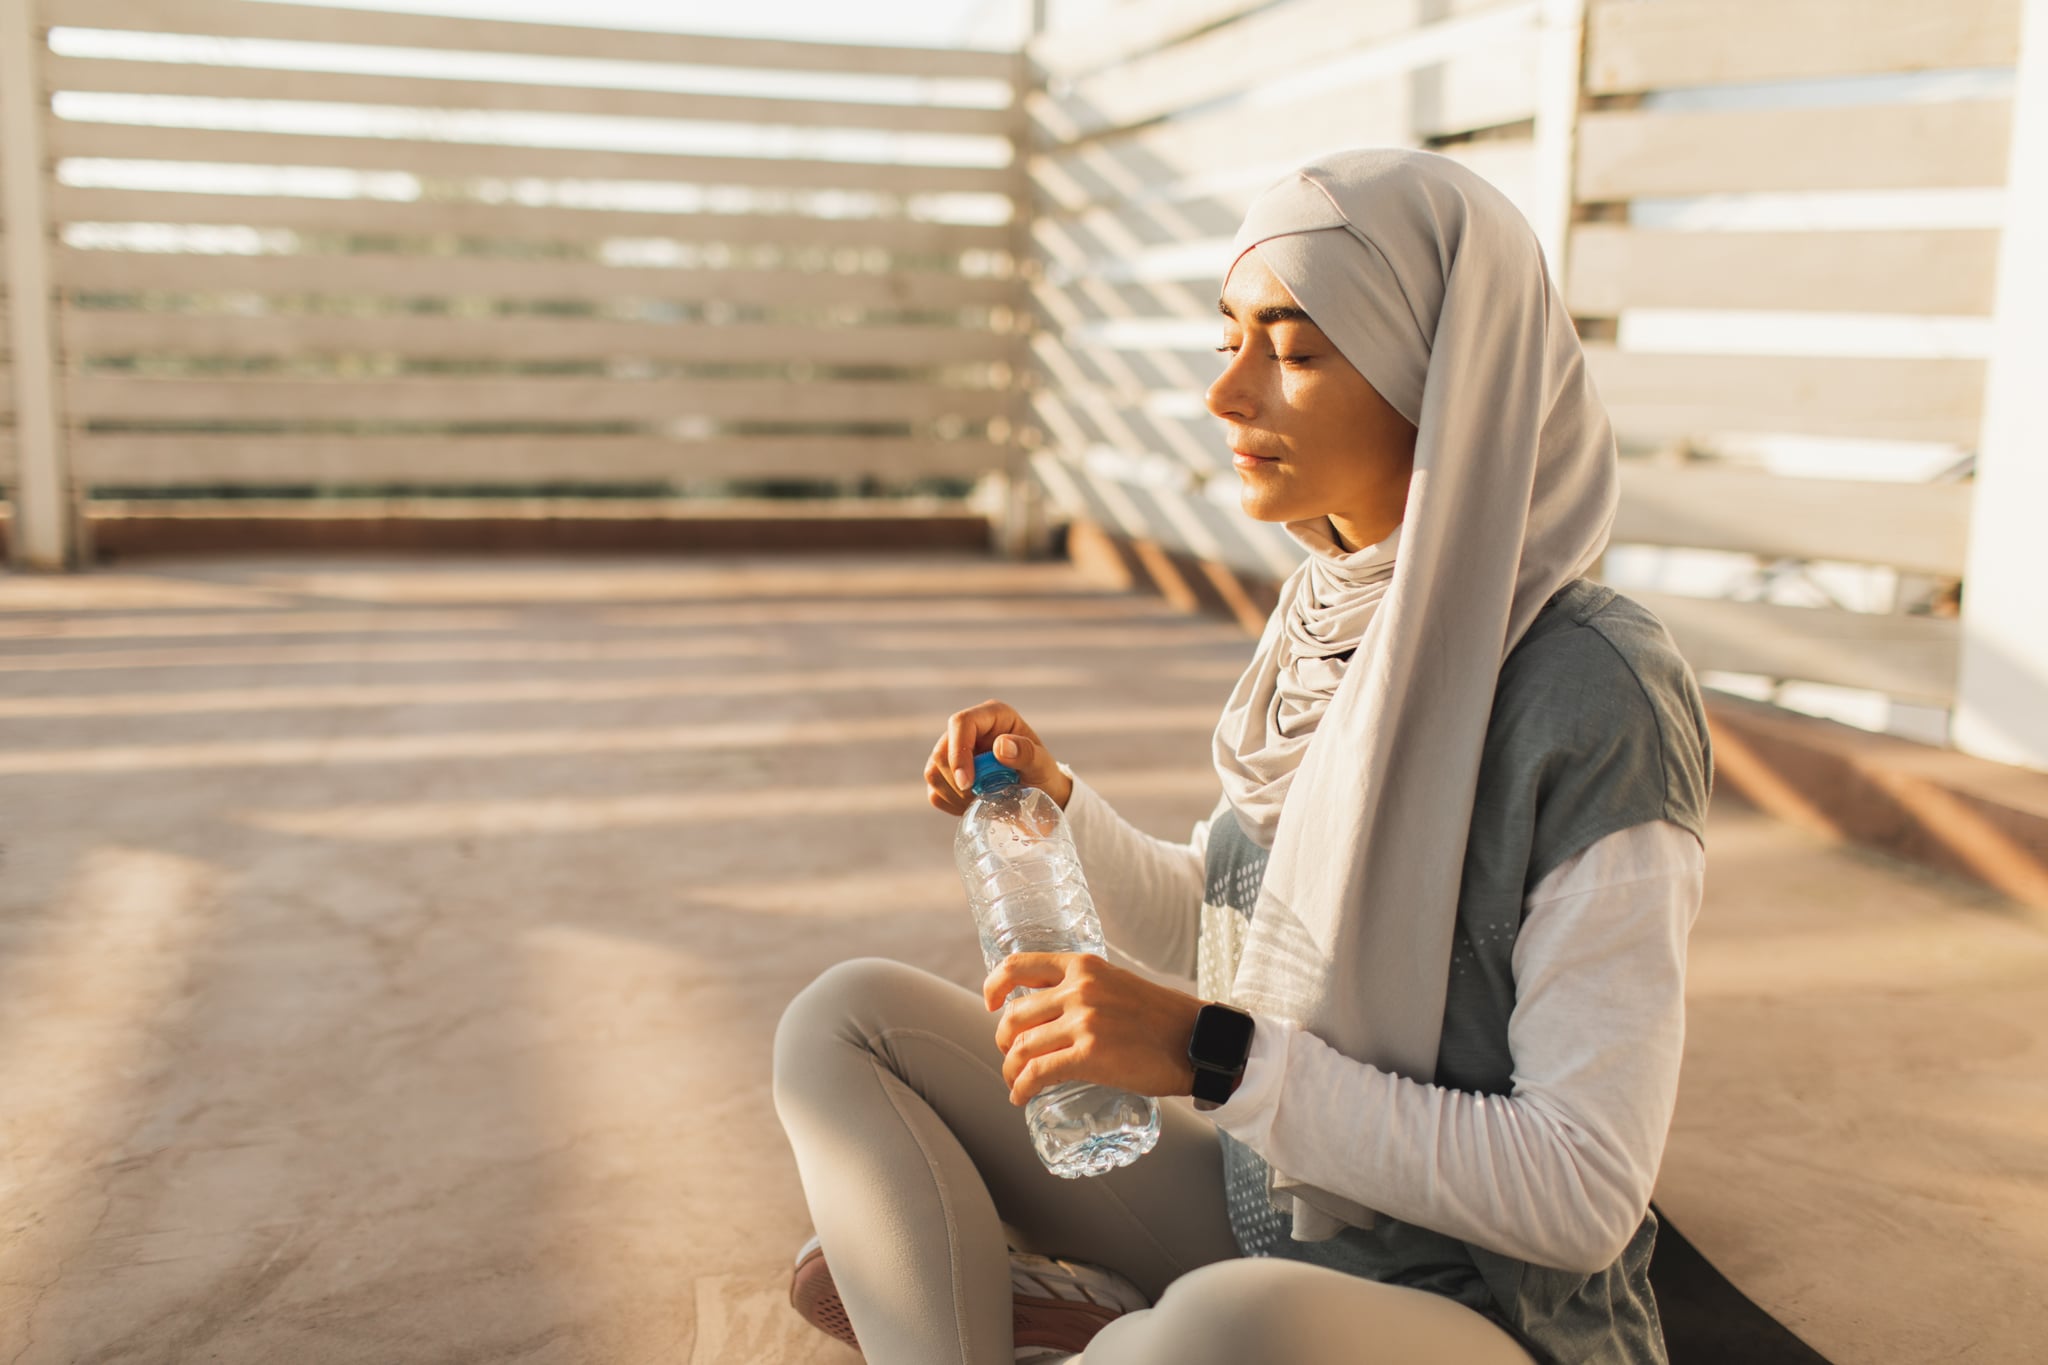 Healthy and active lifestyle of muslim girl in hijab. Training outdoors. Drinking water in plastic bottle. Hydration in sport.